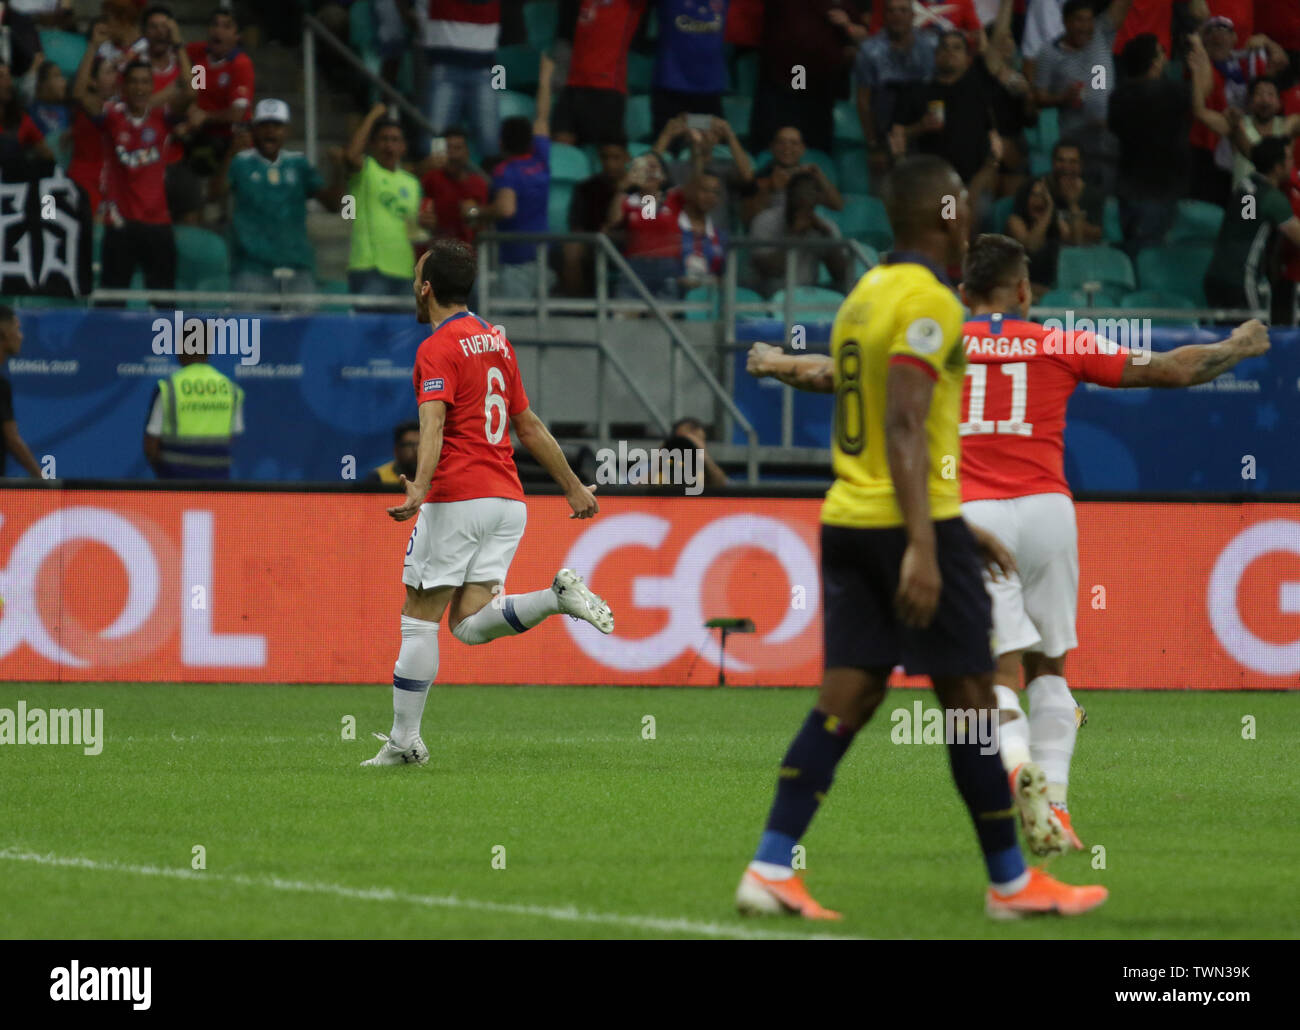 Salvador, Brazil. 21st June, 2019. Fuenzalida, celebrating a goal during a match between Ecuador and Chile, valid for the group stage of the Copa America 2019, held this Friday (21) at the Fonte Nova Arena in Salvador, Bahia, Brazil. Credit: Tiago Caldas/FotoArena/Alamy Live News Stock Photo